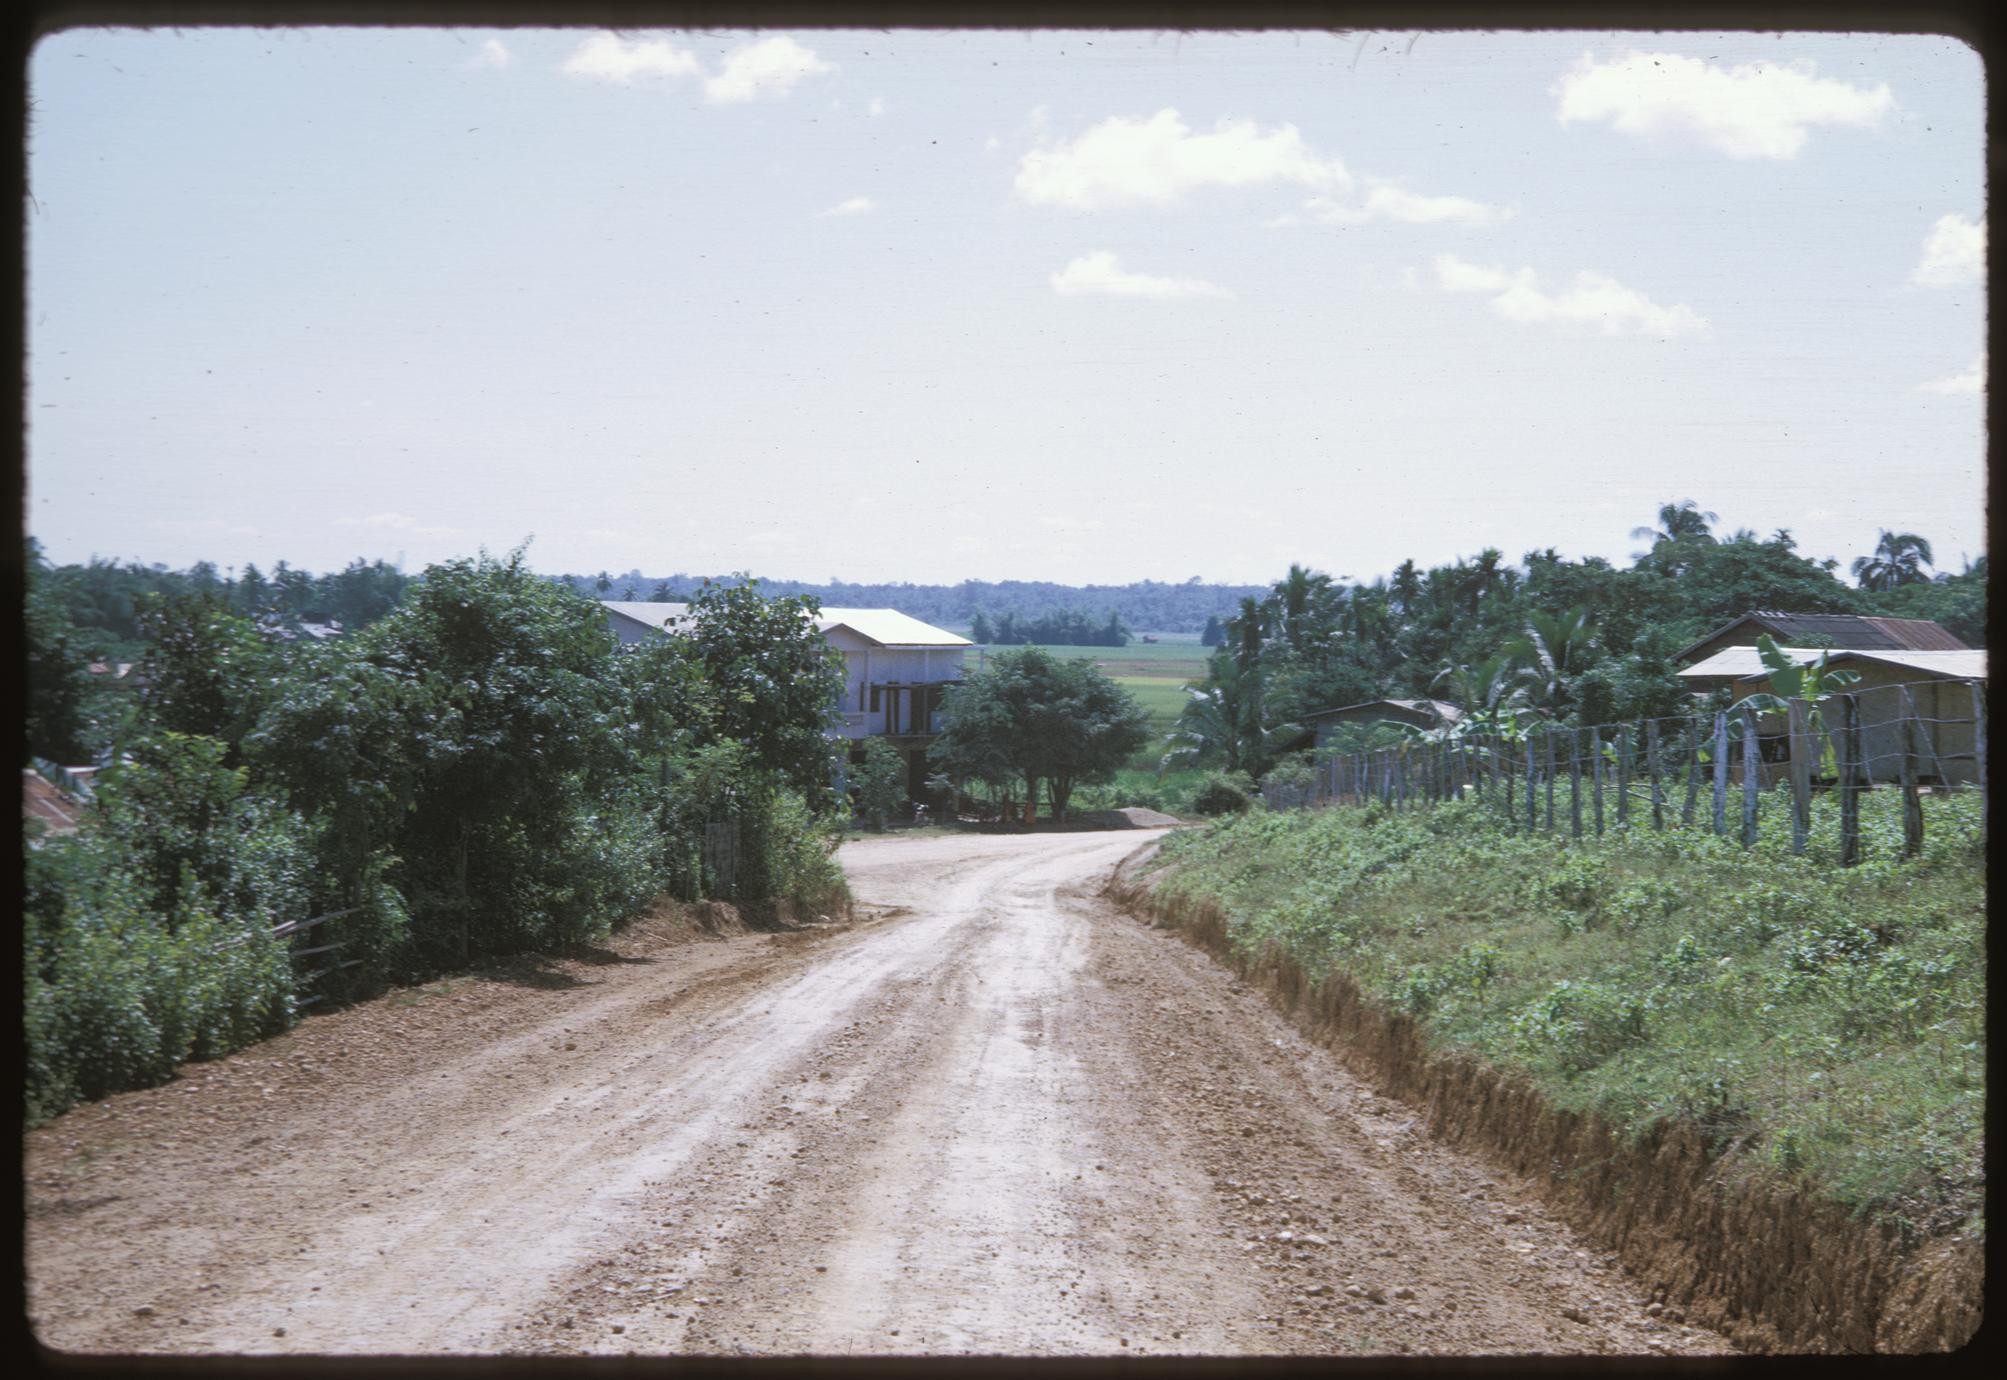 Roads leading into town